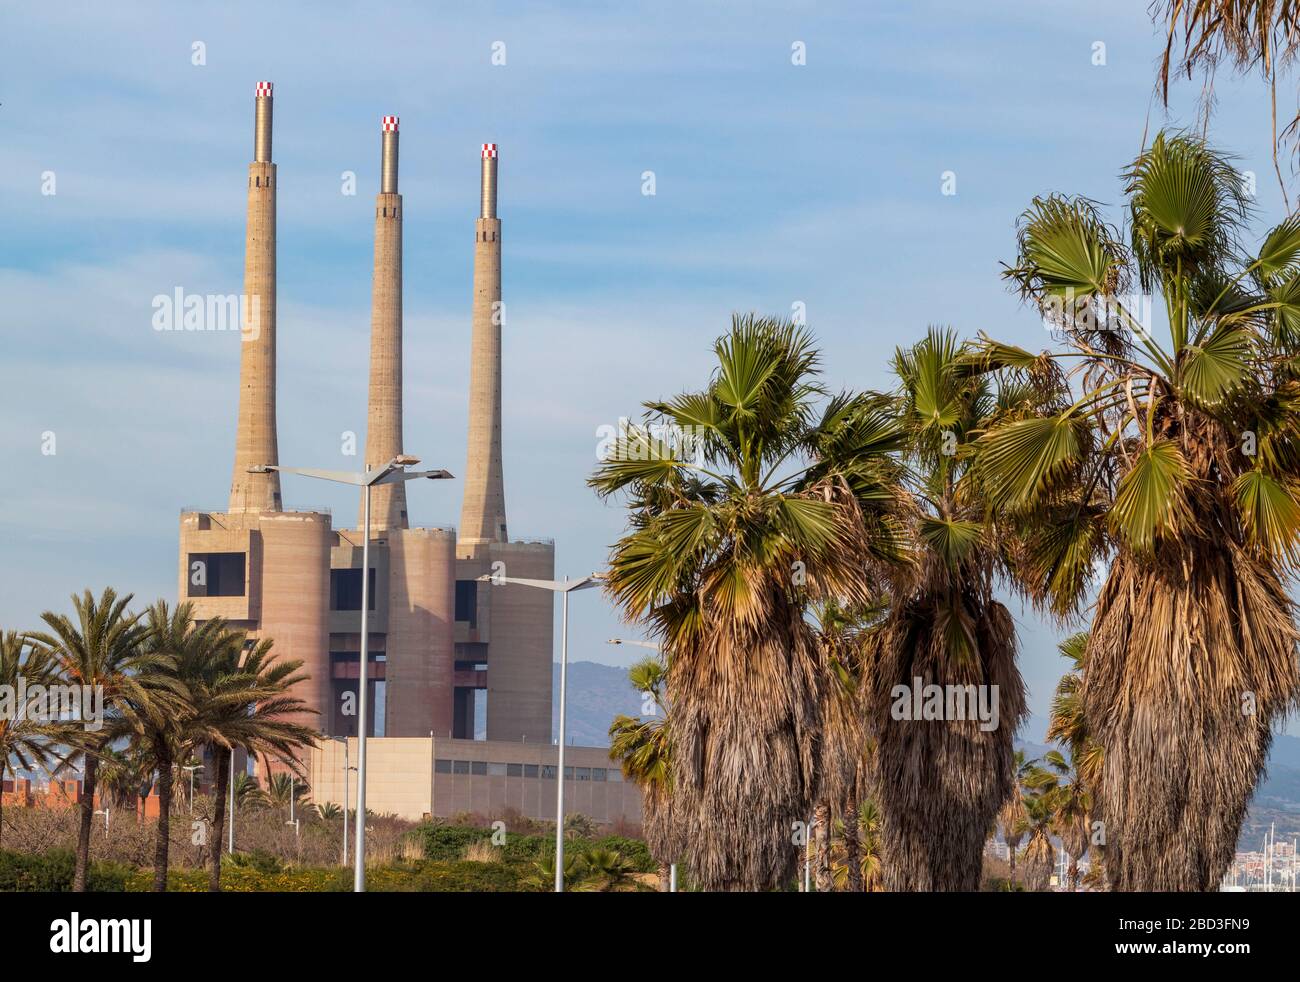 Factories, palm trees and graffiti in front in the middle of the city Stock Photo